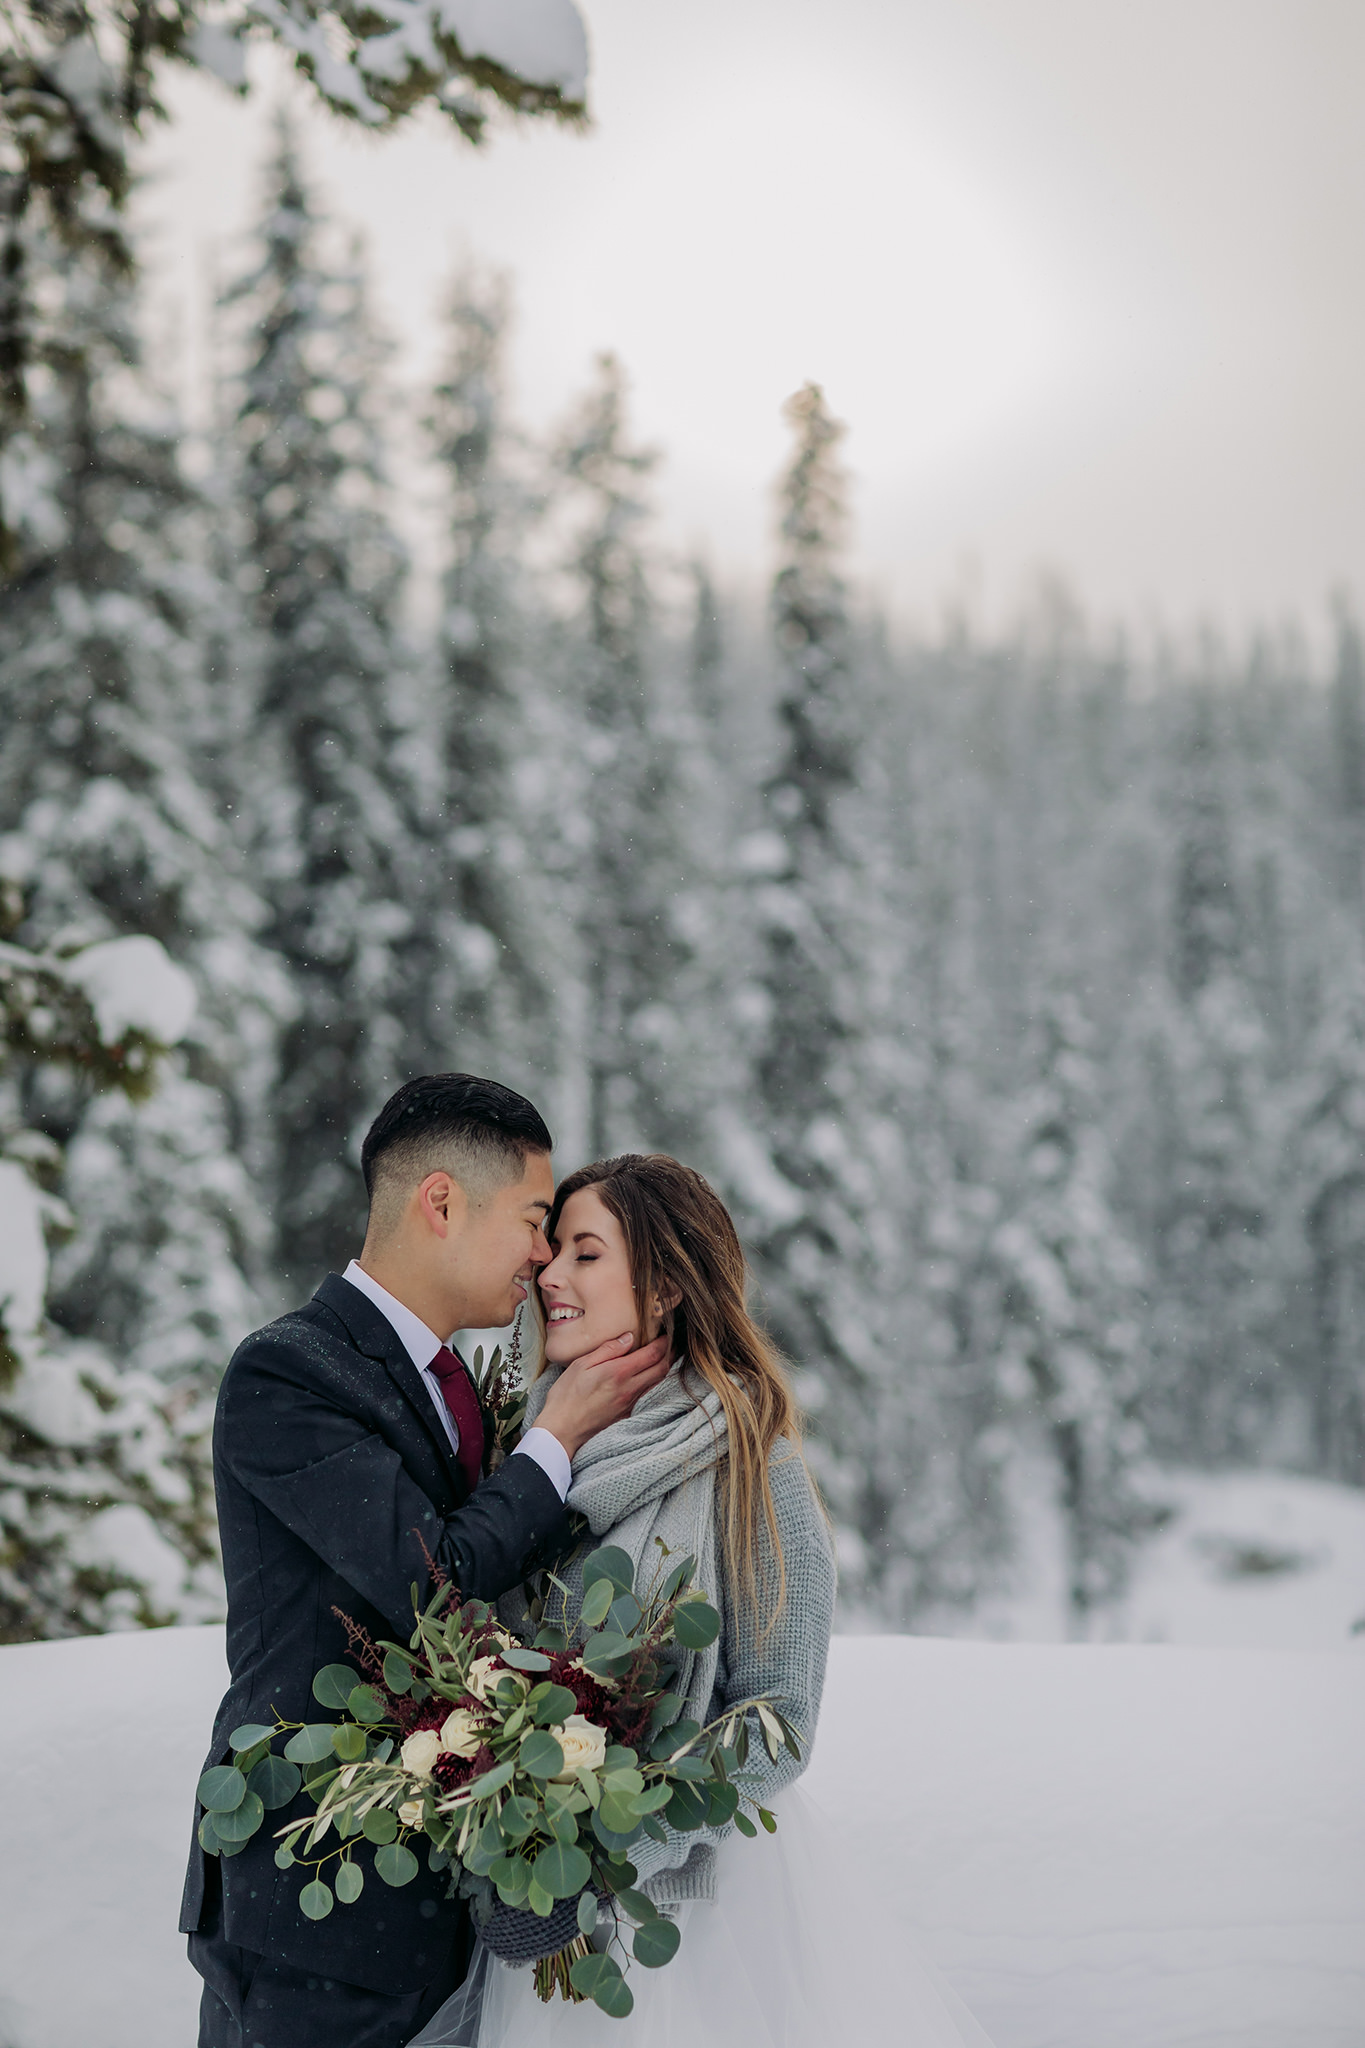 Snowy winter elopement portraits at the natural bridge in Yoho National Park. Mountain wedding in a winter wonderland. Bride in a cozy sweater & matching scarf to keep warm. What to wear for a winter wedding. 